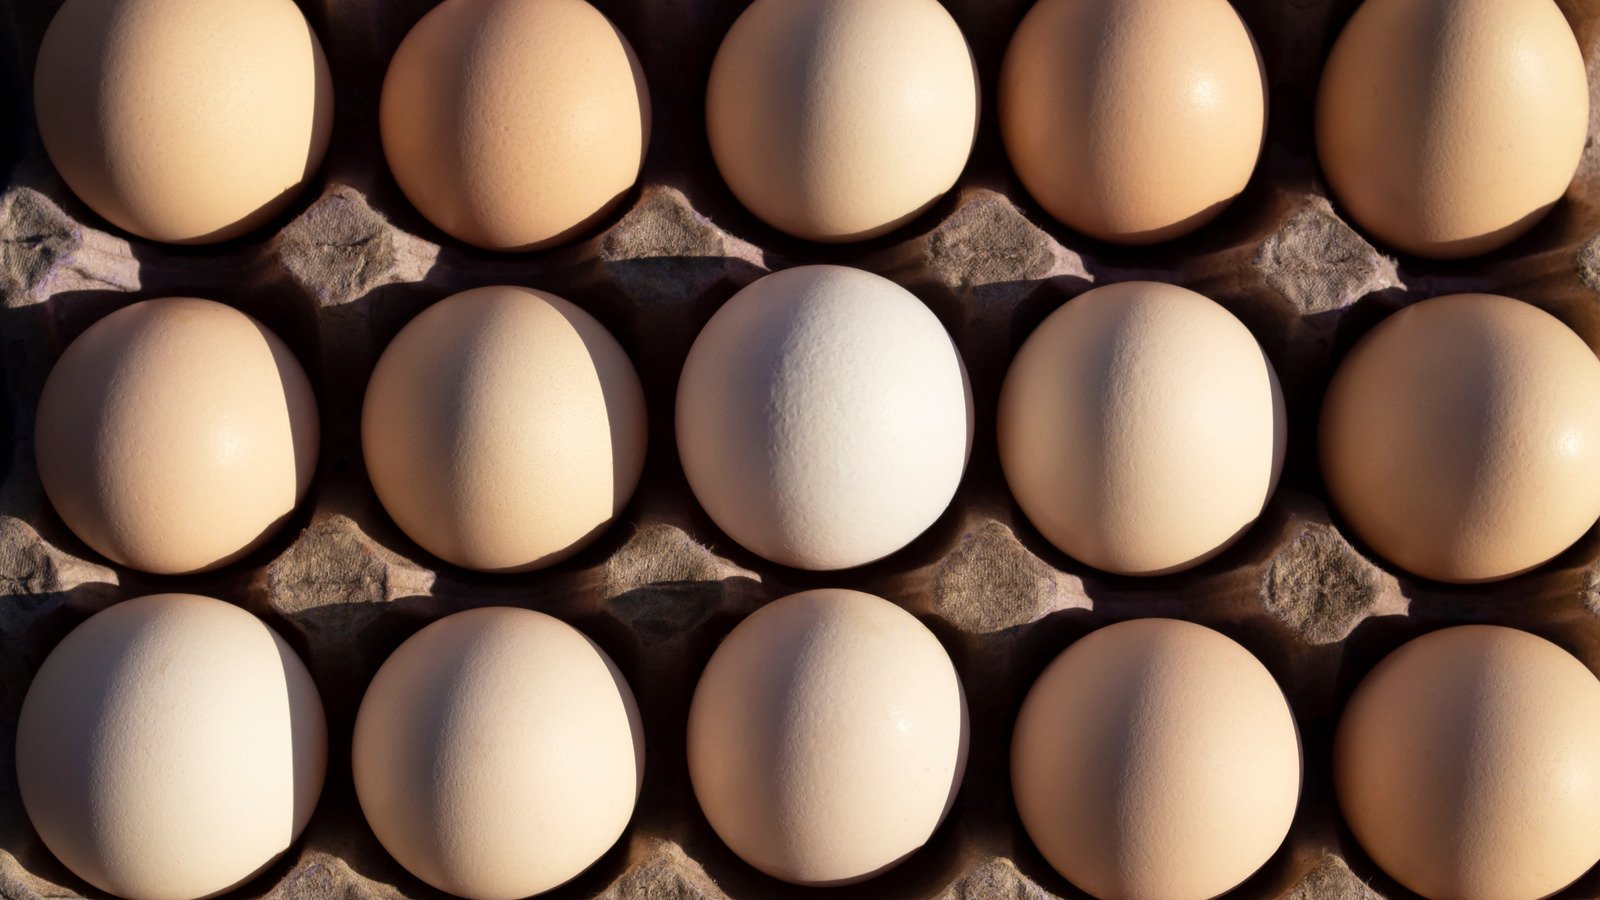 This Is The Healthiest Way To Eat Eggs - Health Digest